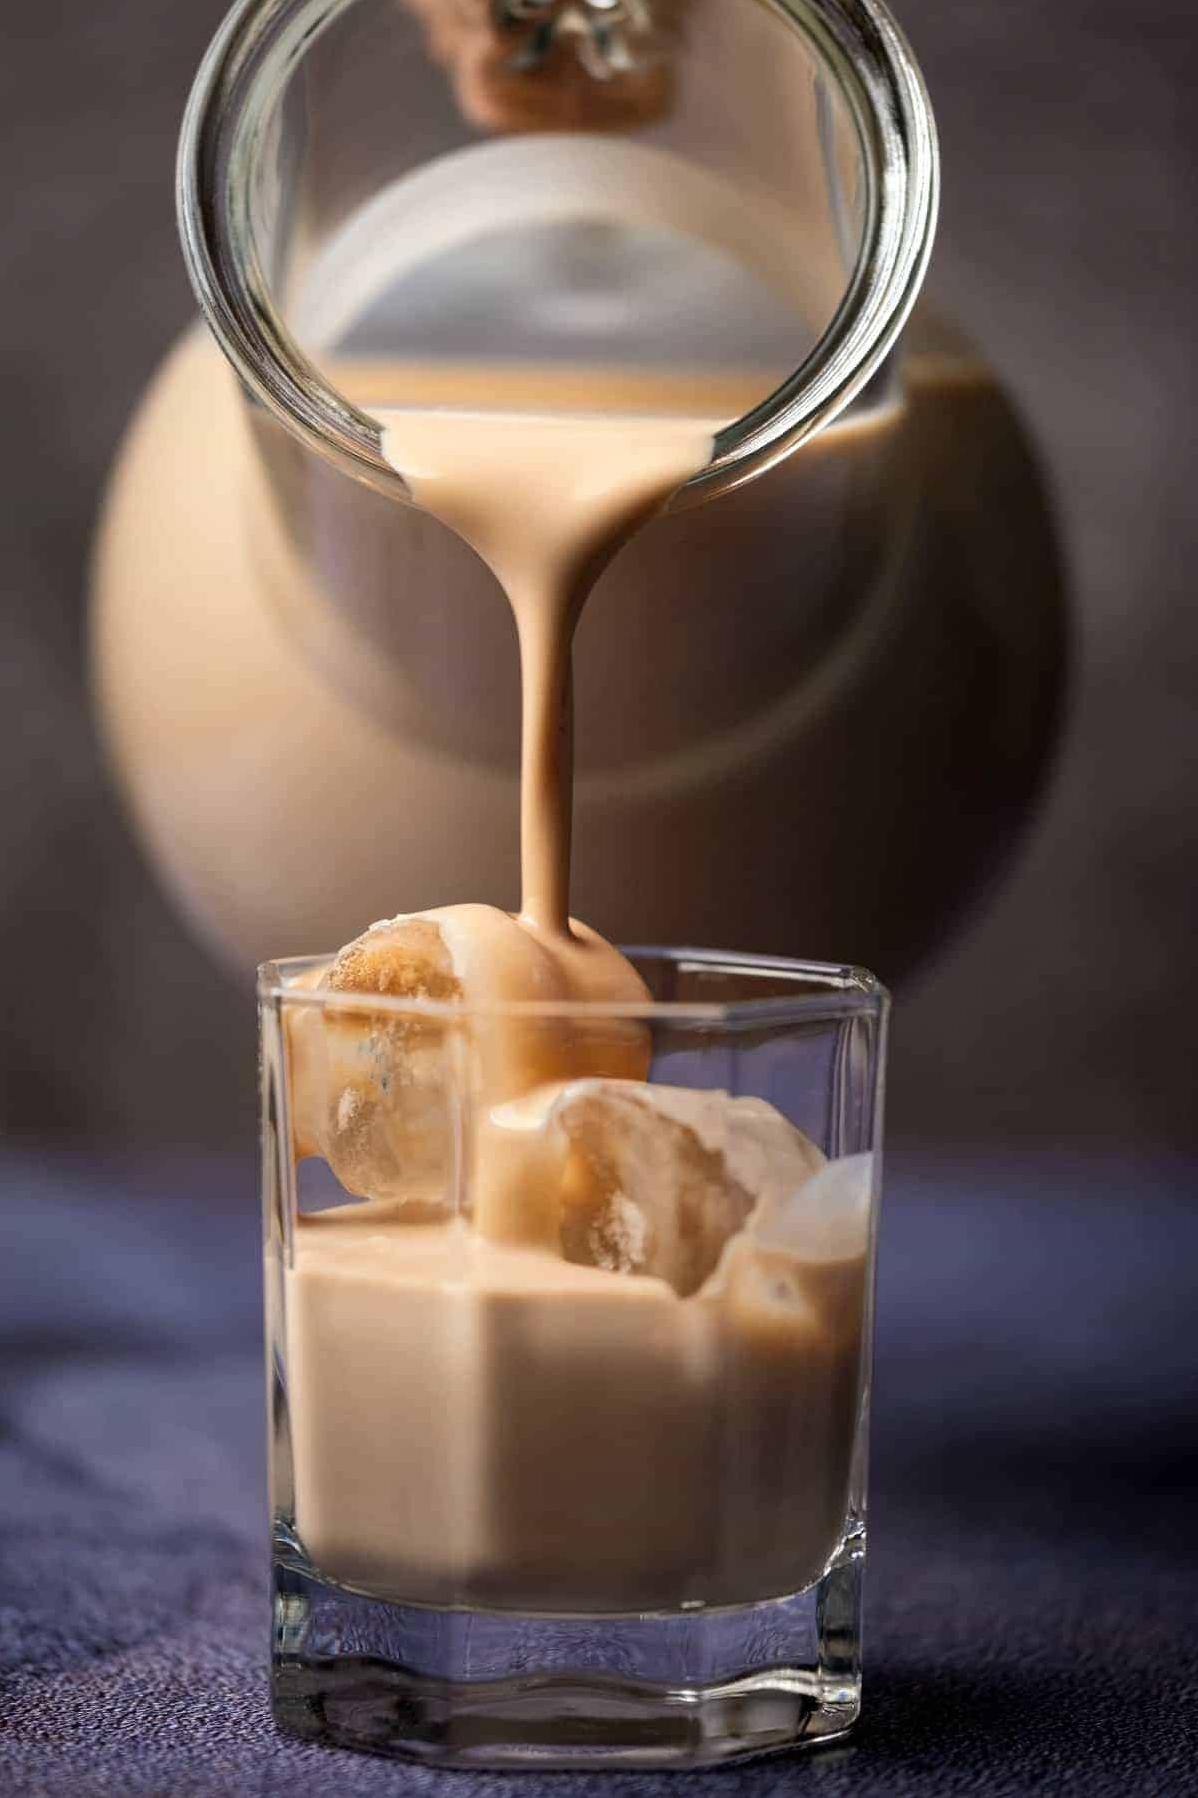  Imagine Dublin in a glass, that's what this homemade Irish cream is all about.